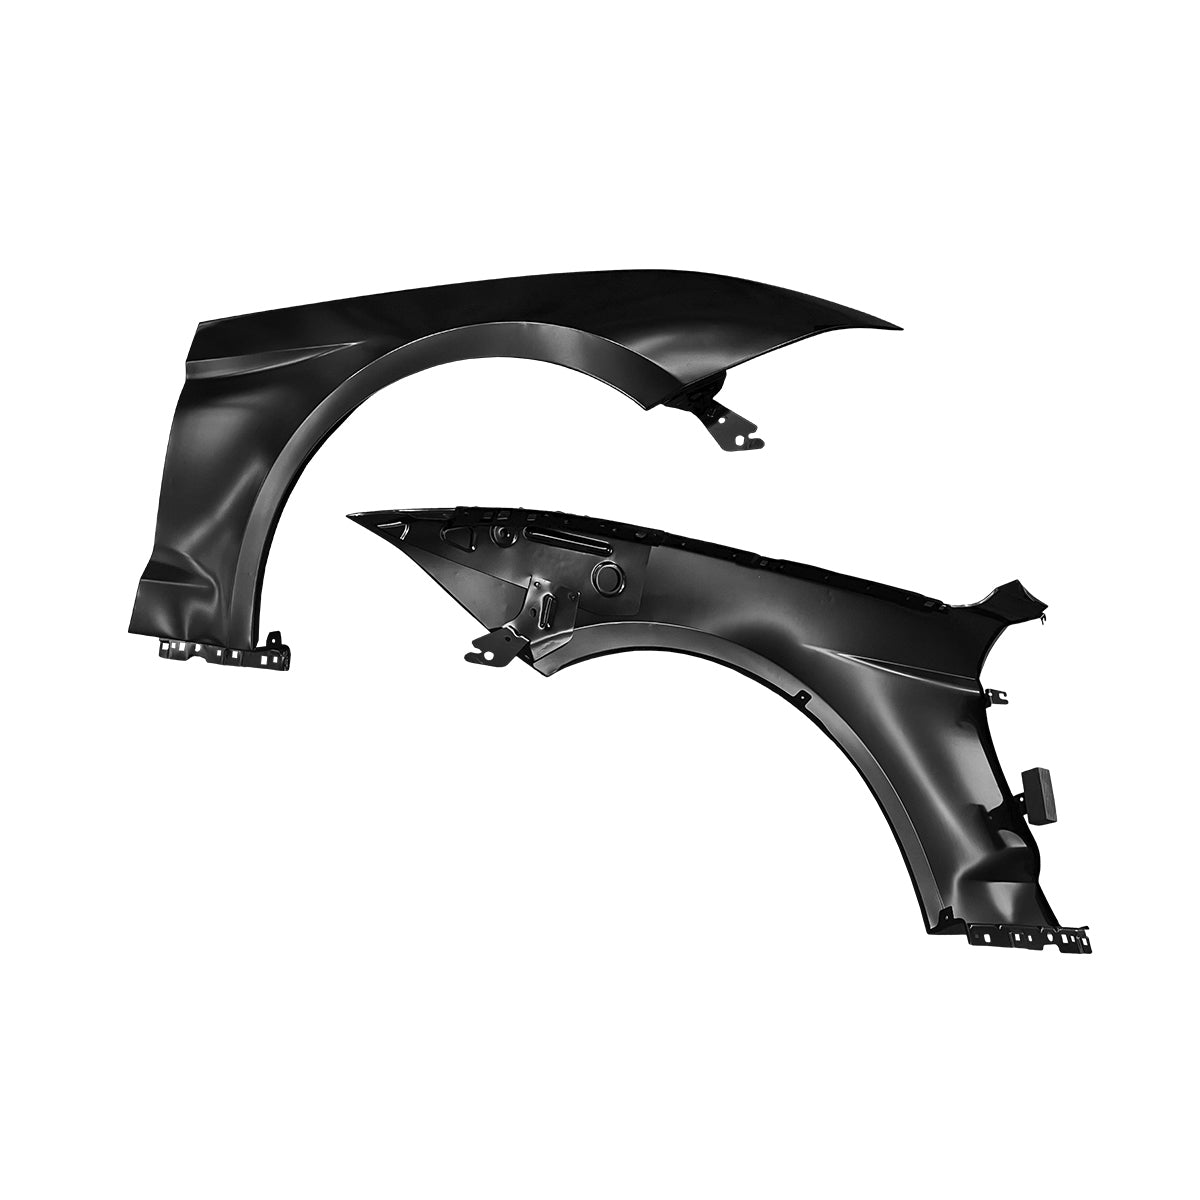 Replacement FRONT FENDER, RH, 2018-2022 Ford Mustang, JR3Z16005A, (Alum)